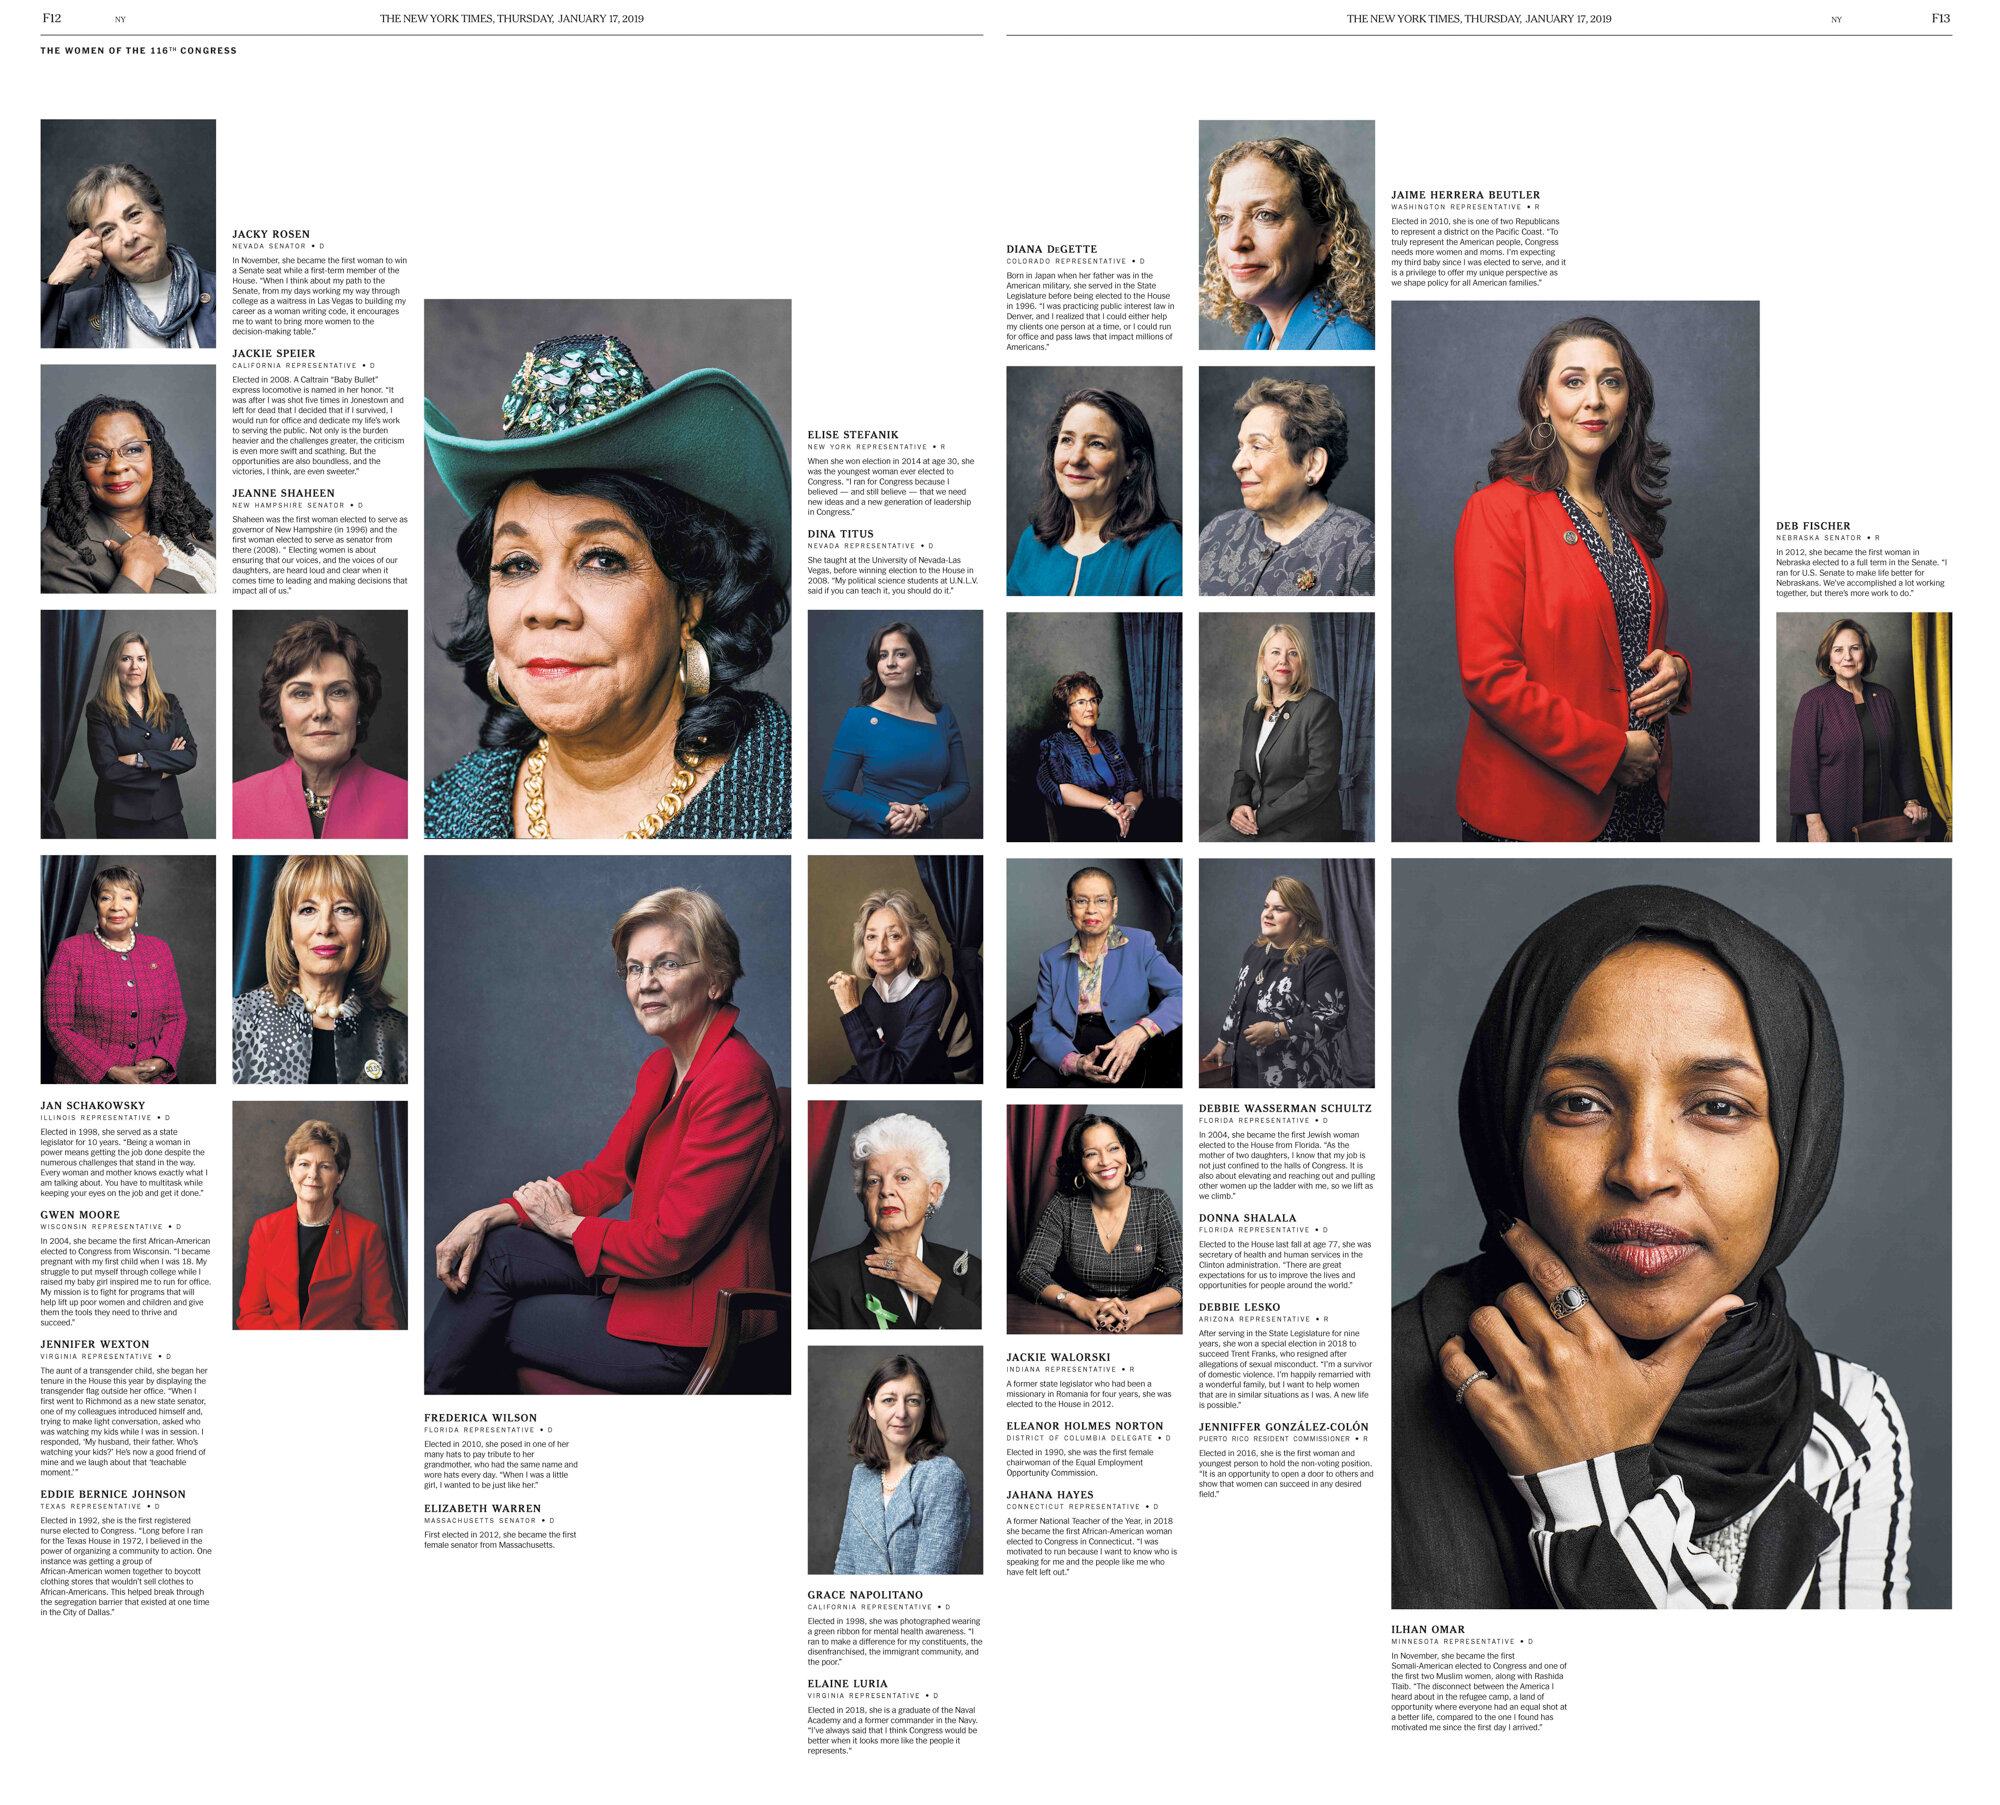 NYT_WOC_Page_7.jpg